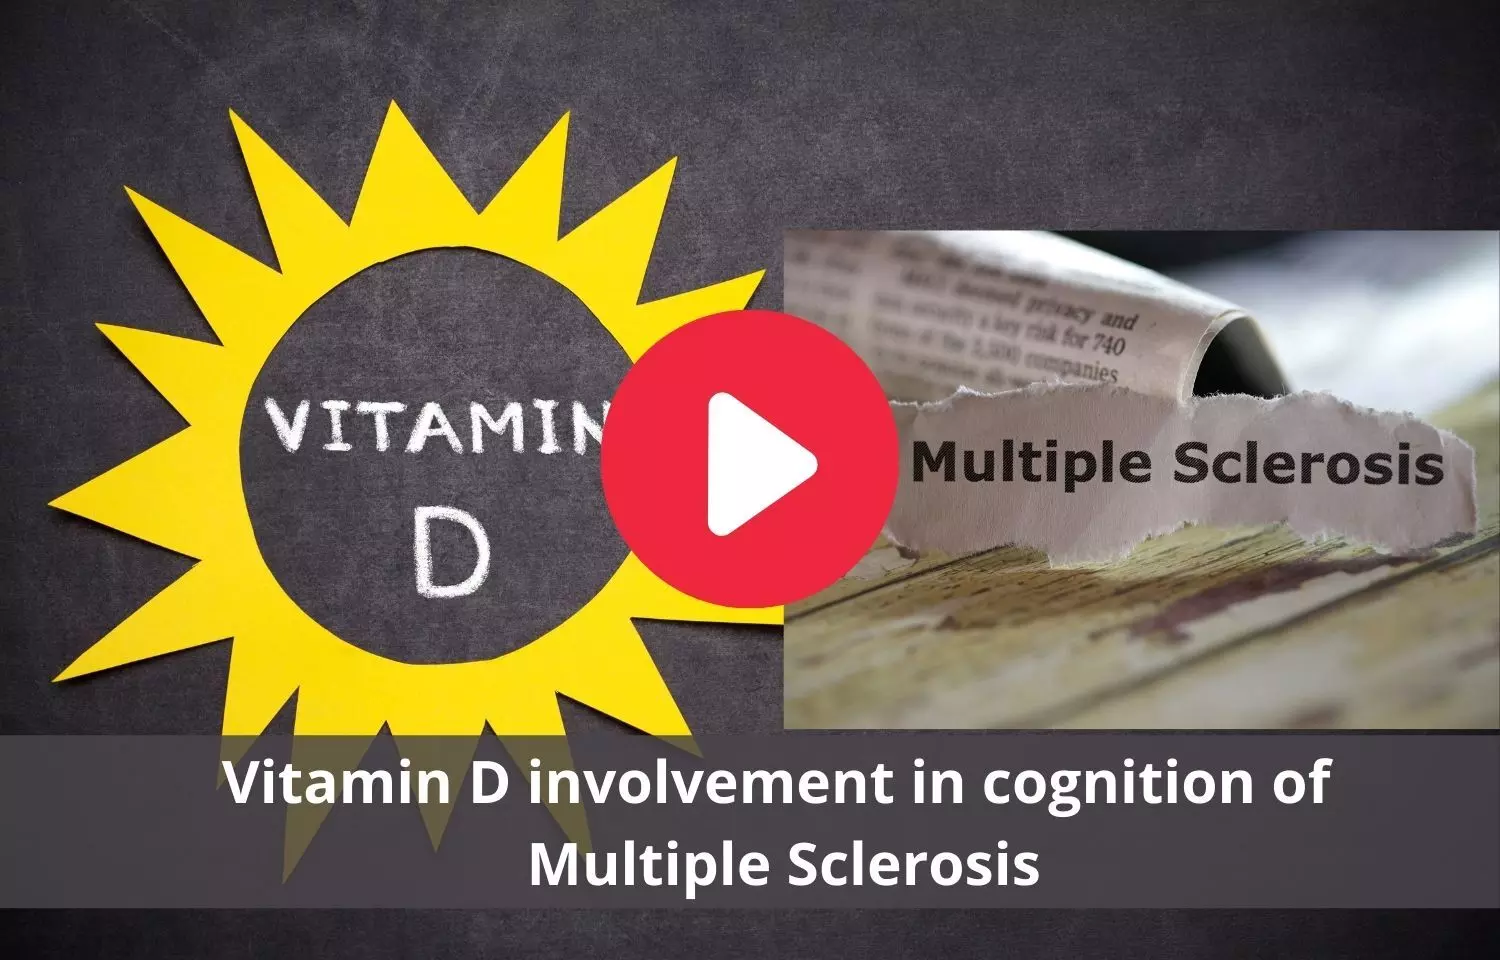 Vitamin D involvement in cognition of Multiple Sclerosis